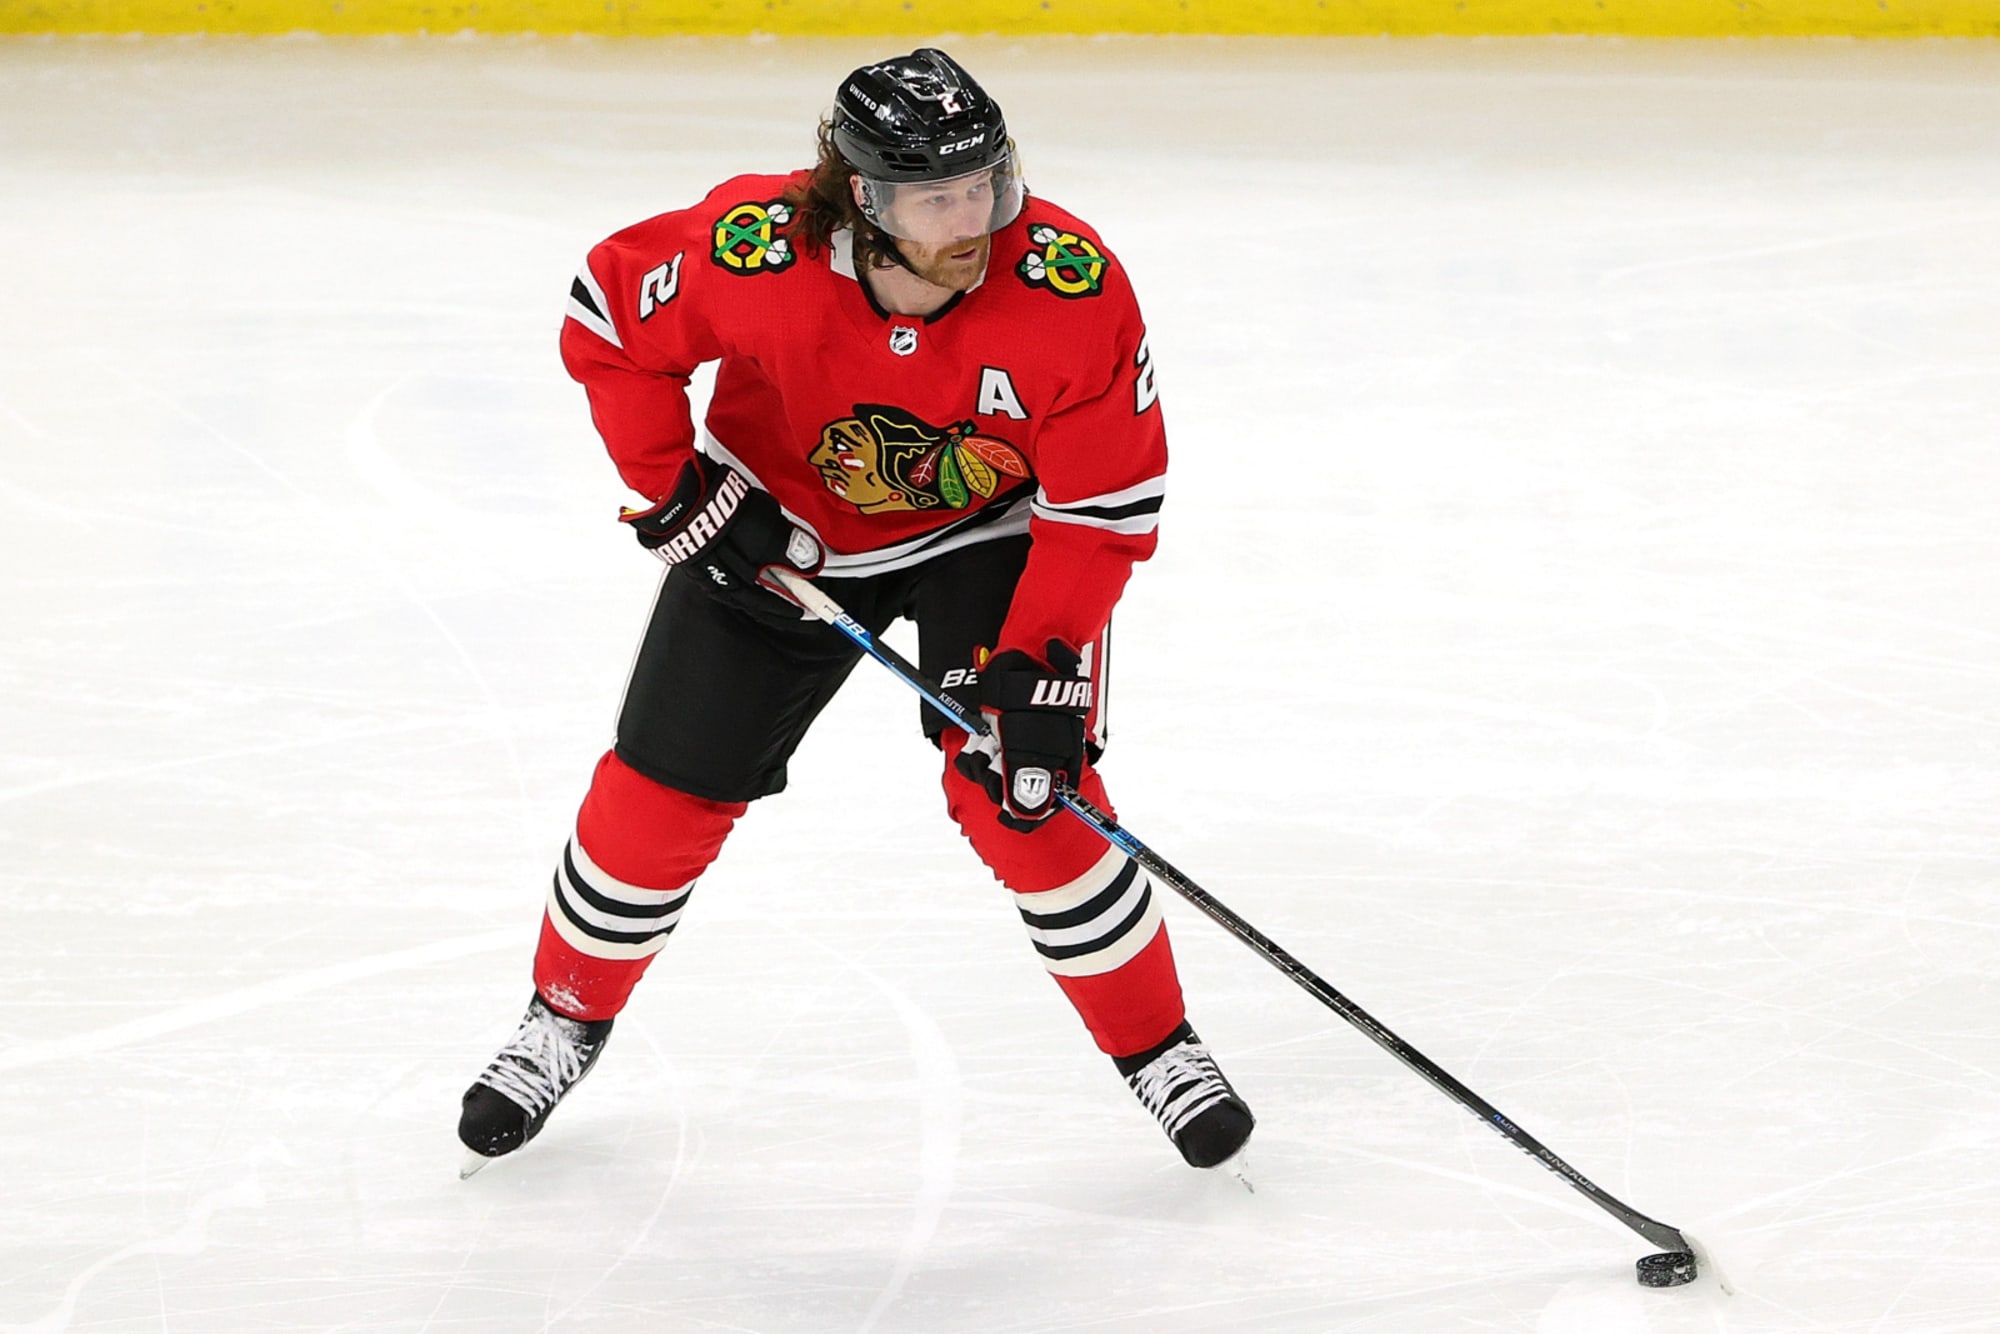 Some thoughts on Duncan Keith, and on the trade that made him an